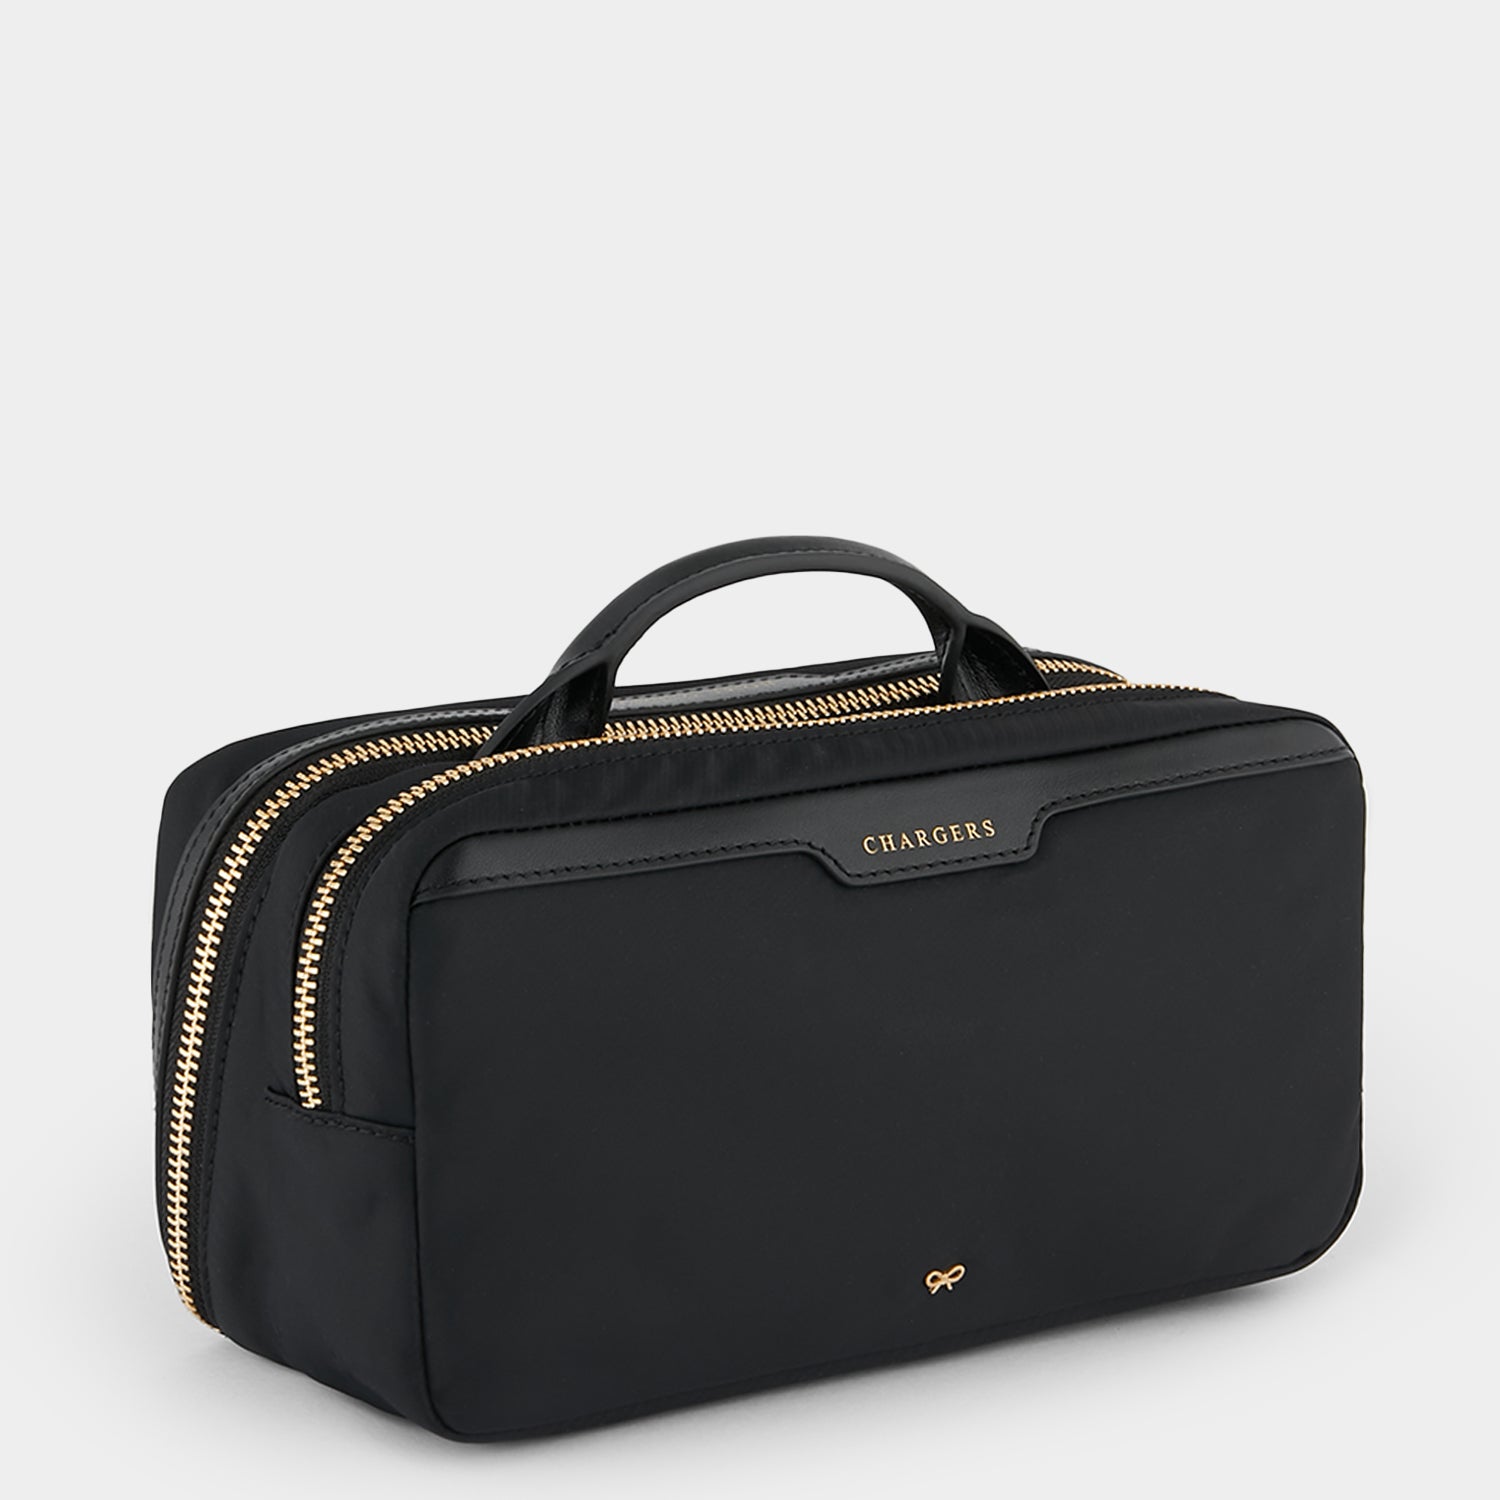 Home Office Pouch -

                  
                    Econyl® Regenerated Nylon in Black -
                  

                  Anya Hindmarch UK
